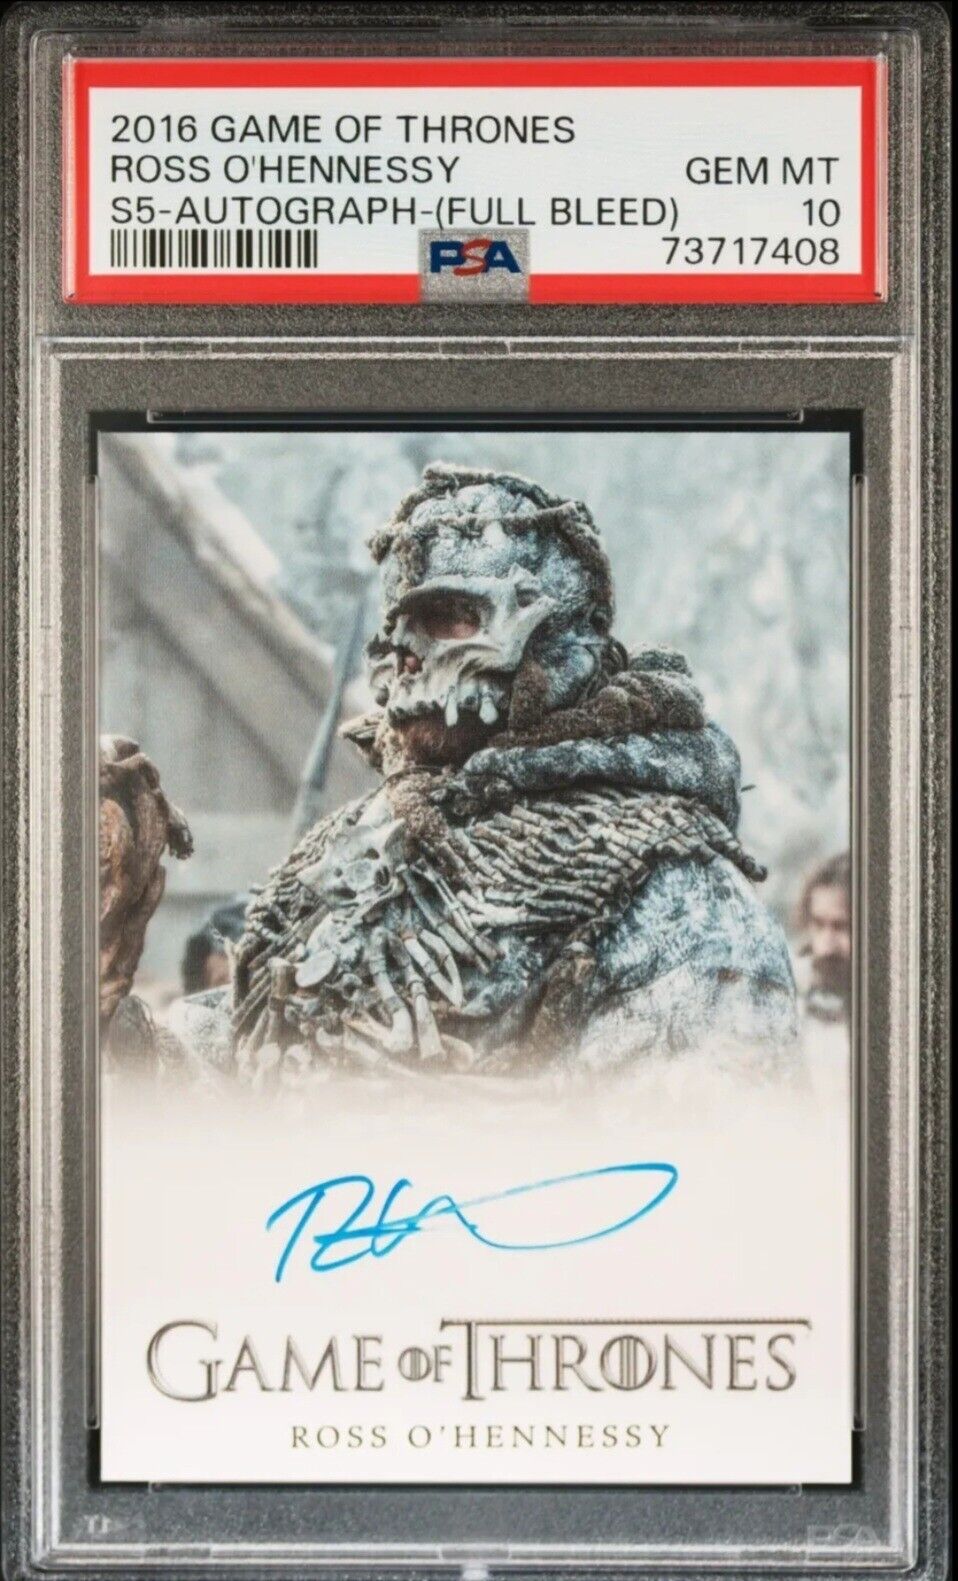 2016 GAME OF THRONES AUTOGRAPH FULL BLEED ROSS O'HENNESSY PSA 10 